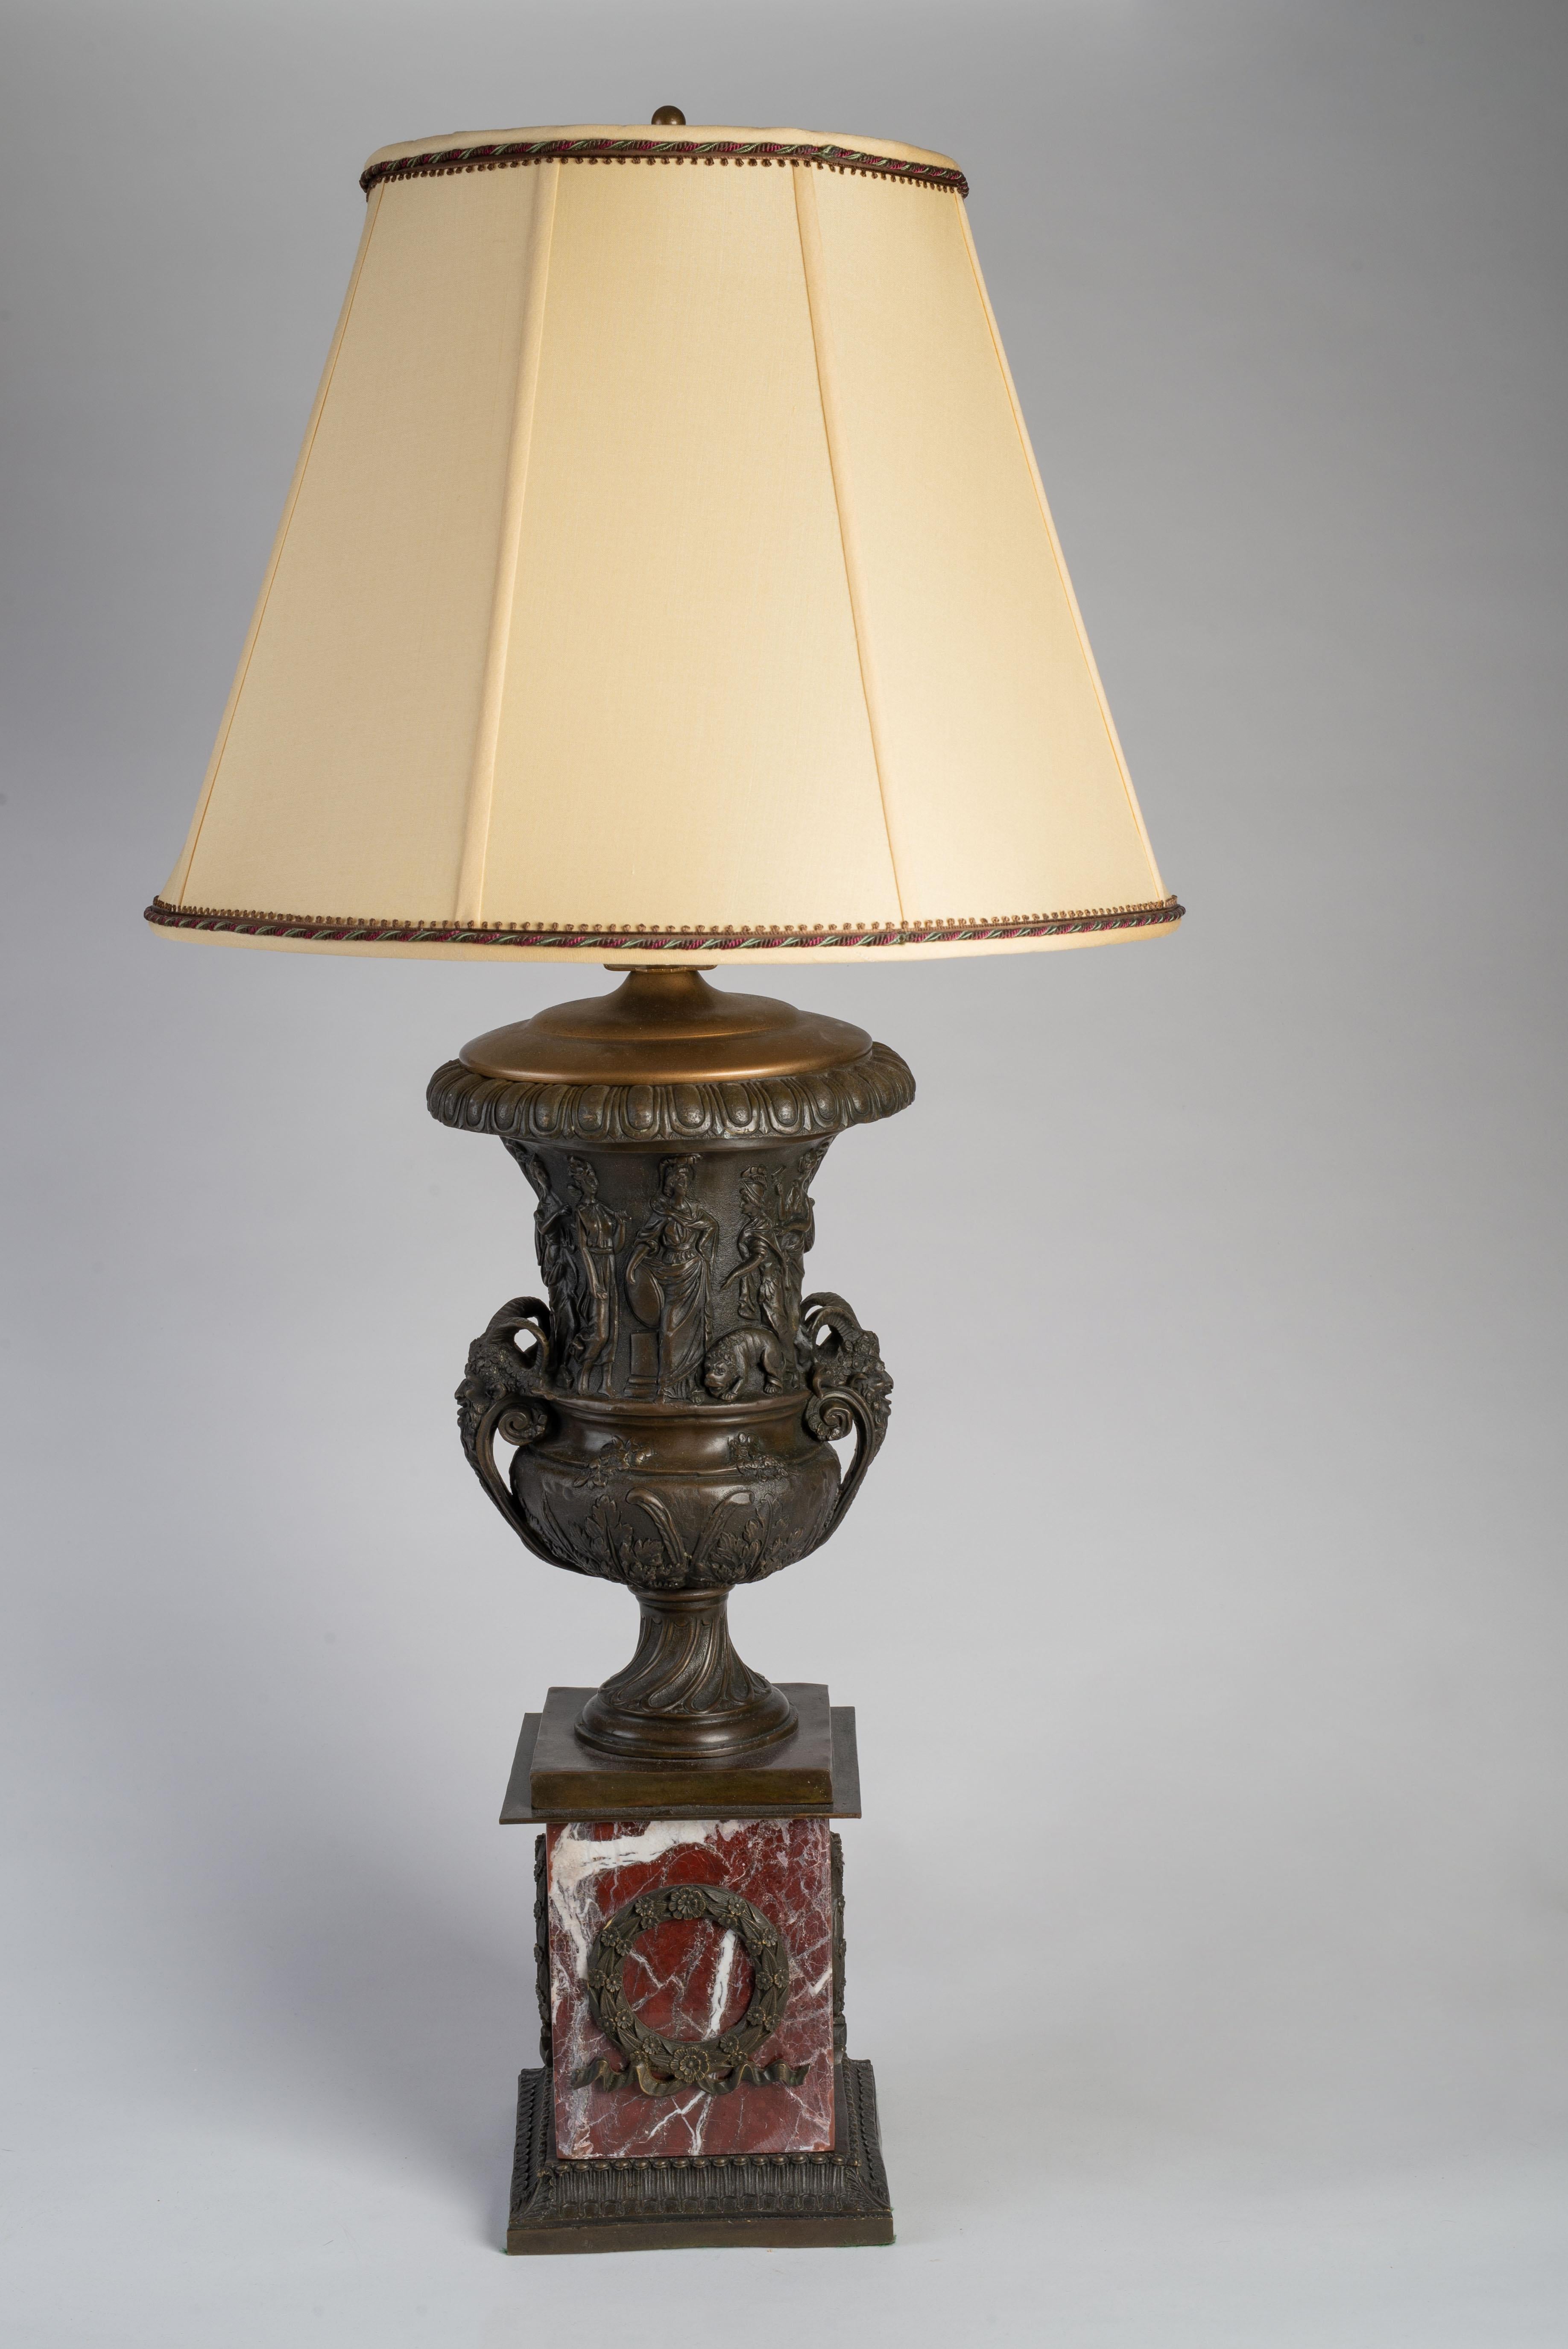 French Pair of Neoclassical Patinated Bronze and Red Marble Urns Mounted as Lamps For Sale